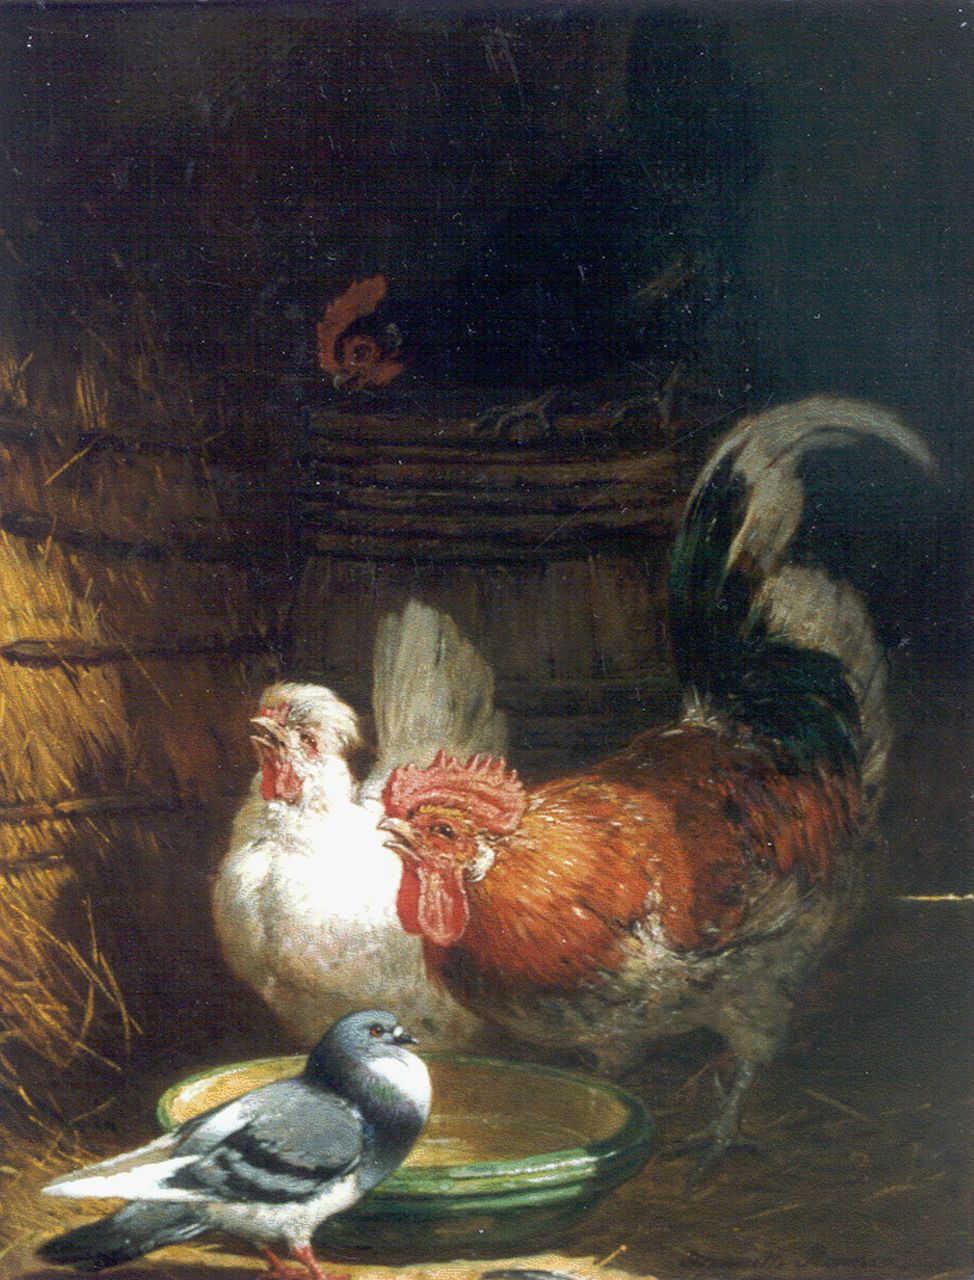 Ronner-Knip H.  | Henriette Ronner-Knip, A stable interior with poultry, Öl auf Holz 40,1 x 31,4 cm, signed l.r.